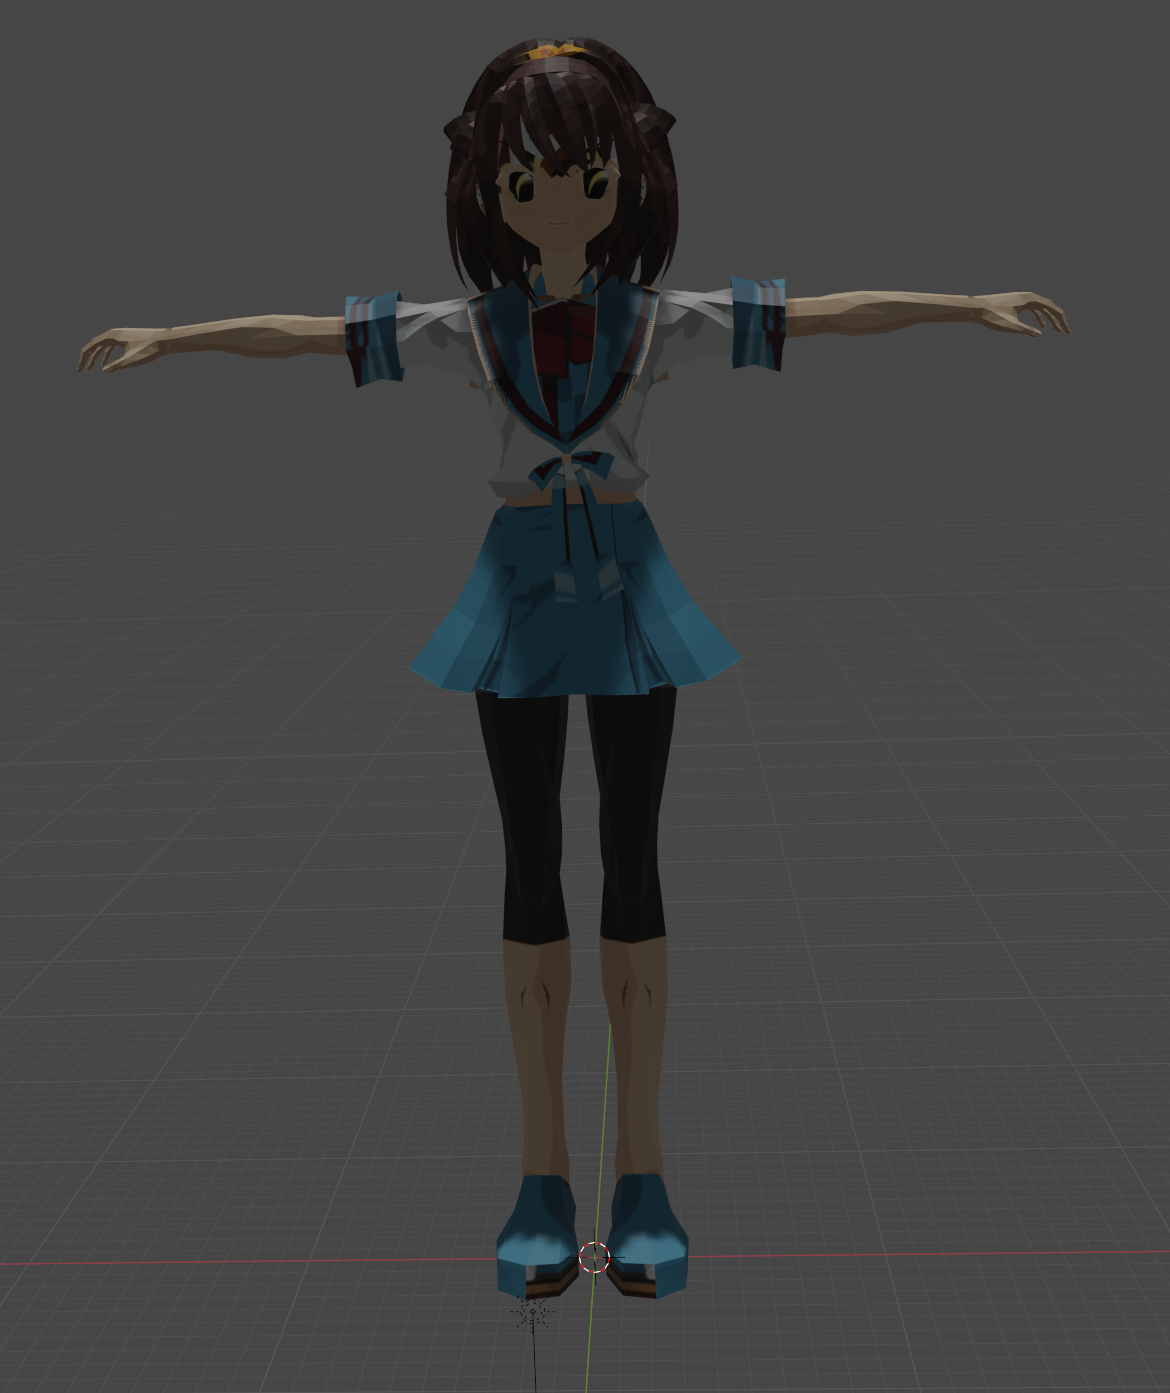 A somewhat janky version of Haruhi Suzumiya imported into the blender window